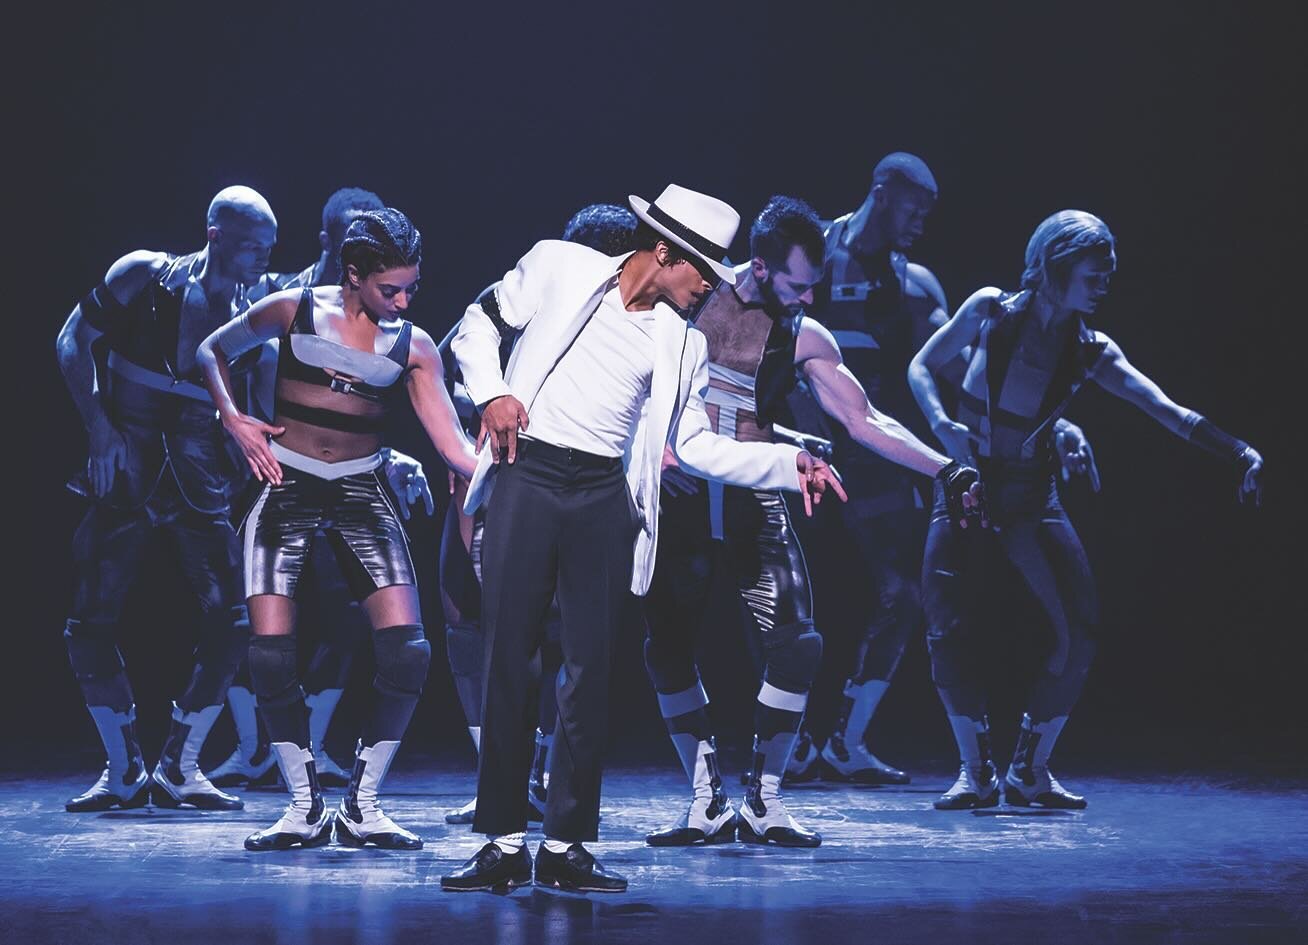 MICHAEL JACKSON CONTINUES TO AMAZE AND DELIGHT

He is one of the greatest entertainers of all time. Now, Michael Jackson&rsquo;s unparalleled artistry is heading to the West End in the Tony Award&reg;-winning new show, MJ The Musical. Performances wi